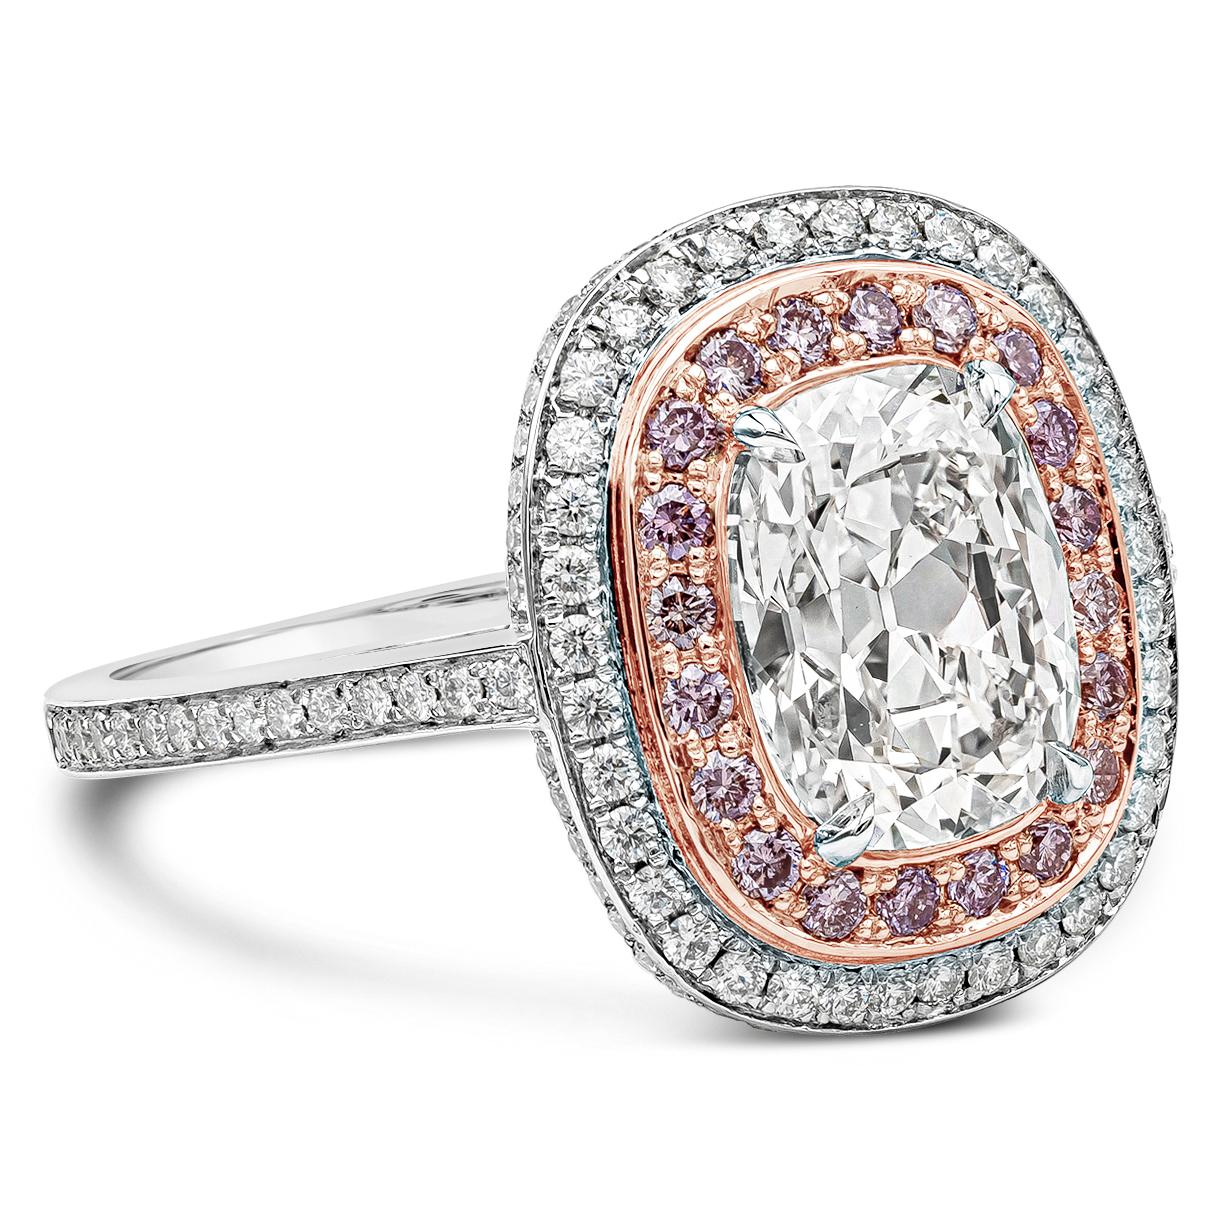 A well-crafted engagement ring style, showcasing a 2.09 carats cushion cut diamond certified by GIA as E color and VVS2 clarity. Surrounding the center diamond are round pink and white diamonds in a double halo setting. Shank is diamond encrusted in